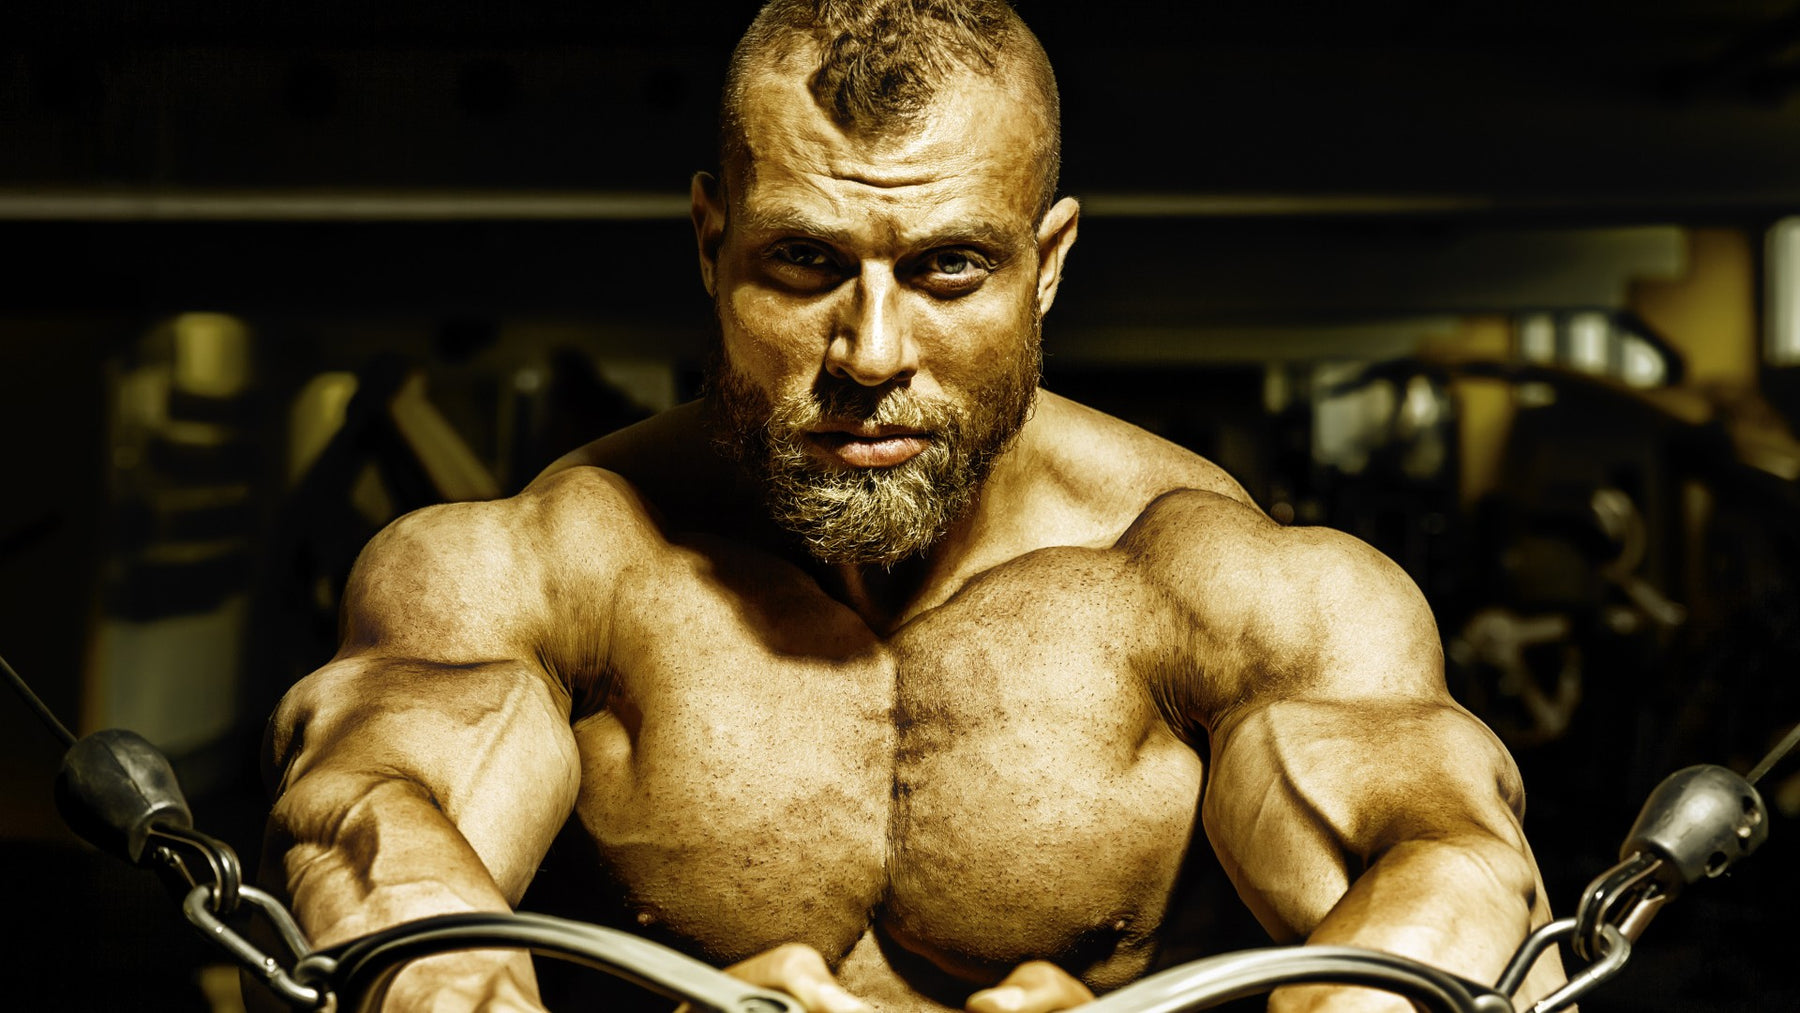 OP/ED: The Slow, Painful Death of Bodybuilding by Marc Lobliner